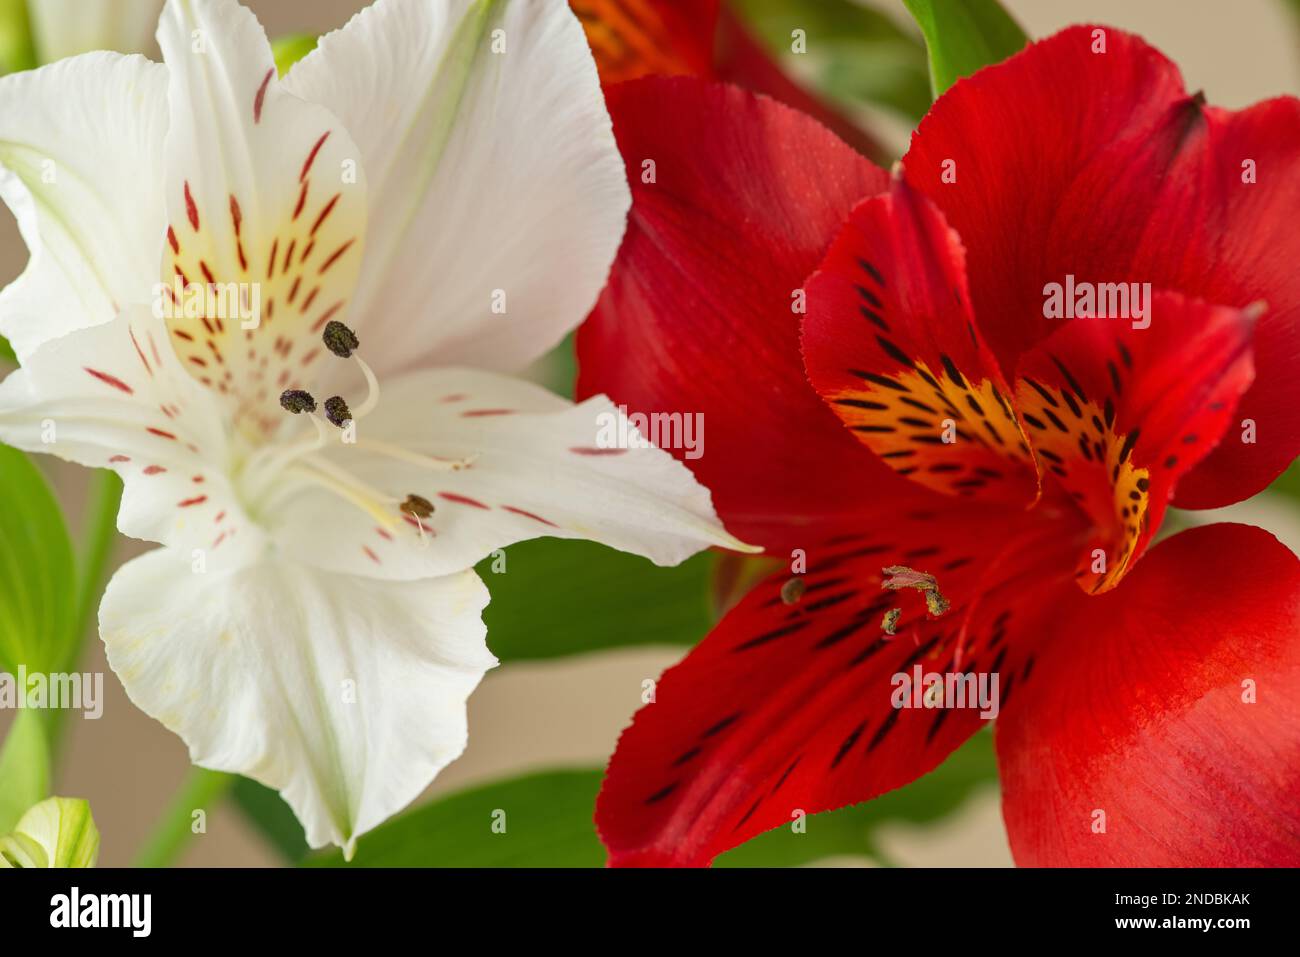 colorful alstroemeria flowers on a beige background Stock Photo